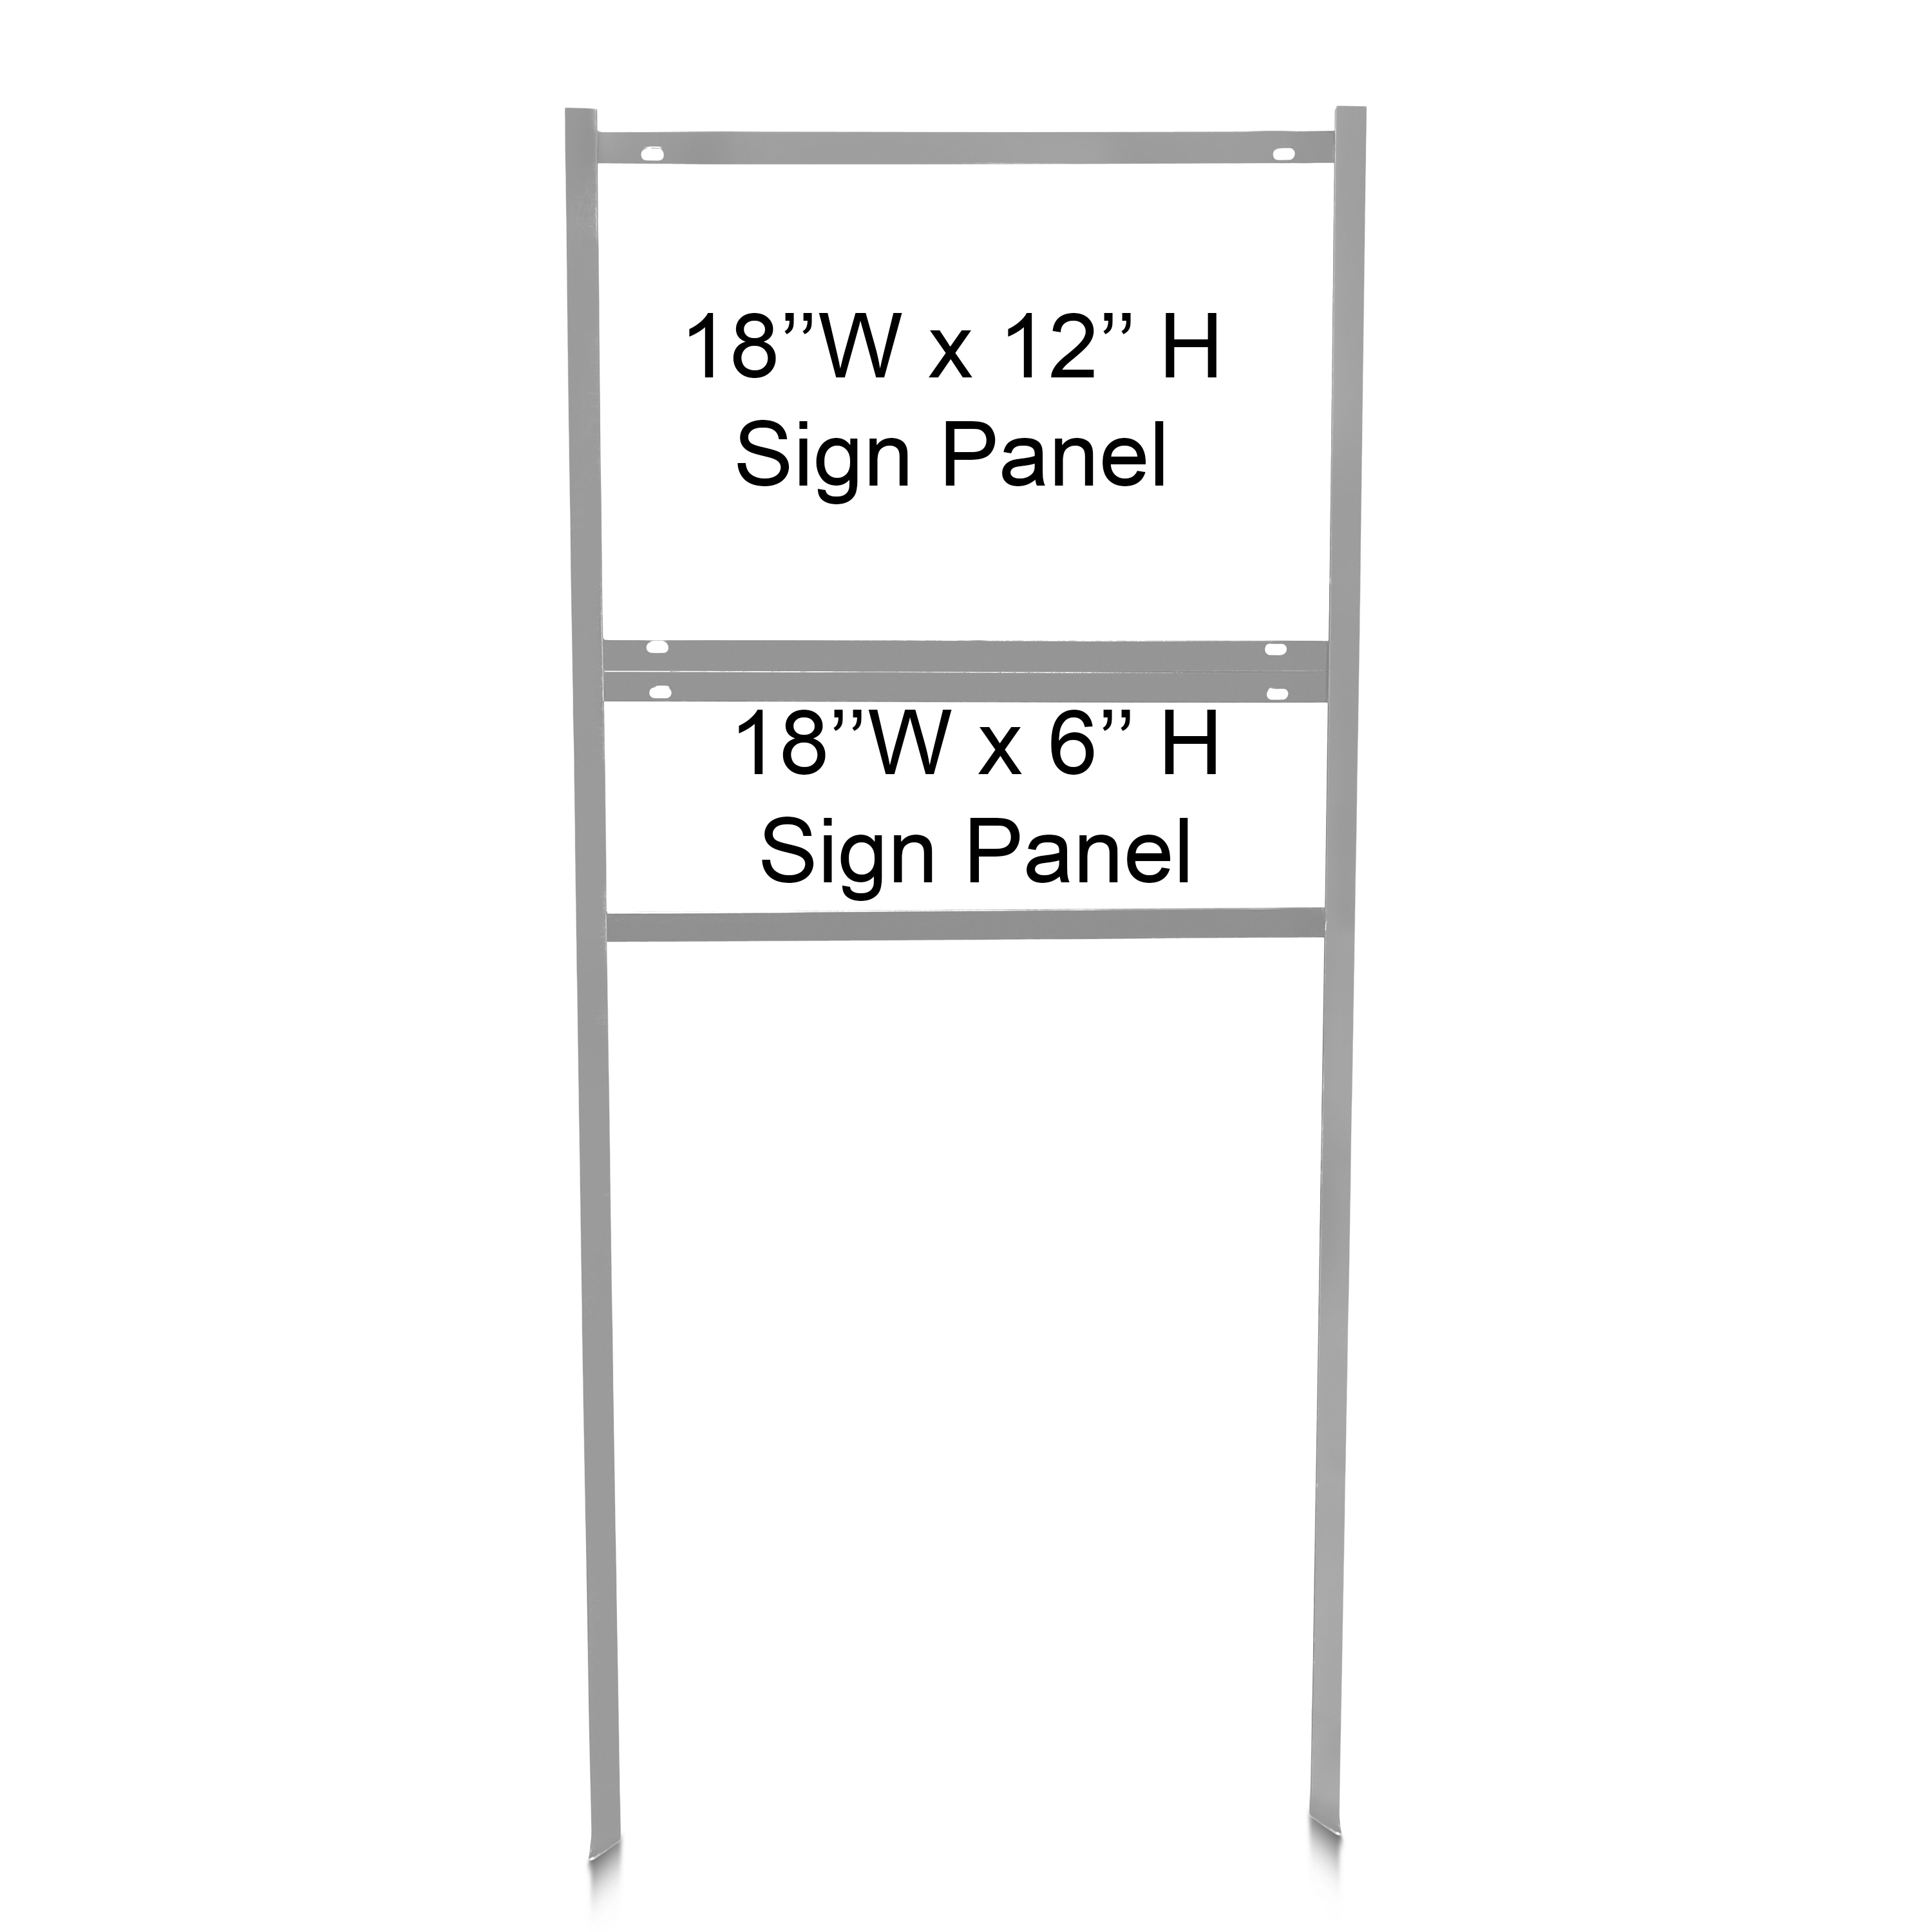 18'' Wide x 12'' Tall Gray Single Rider Slide-in/Bolt-in Real Estate Sign Panel Frame (accepts up to 1/8'' thickness)